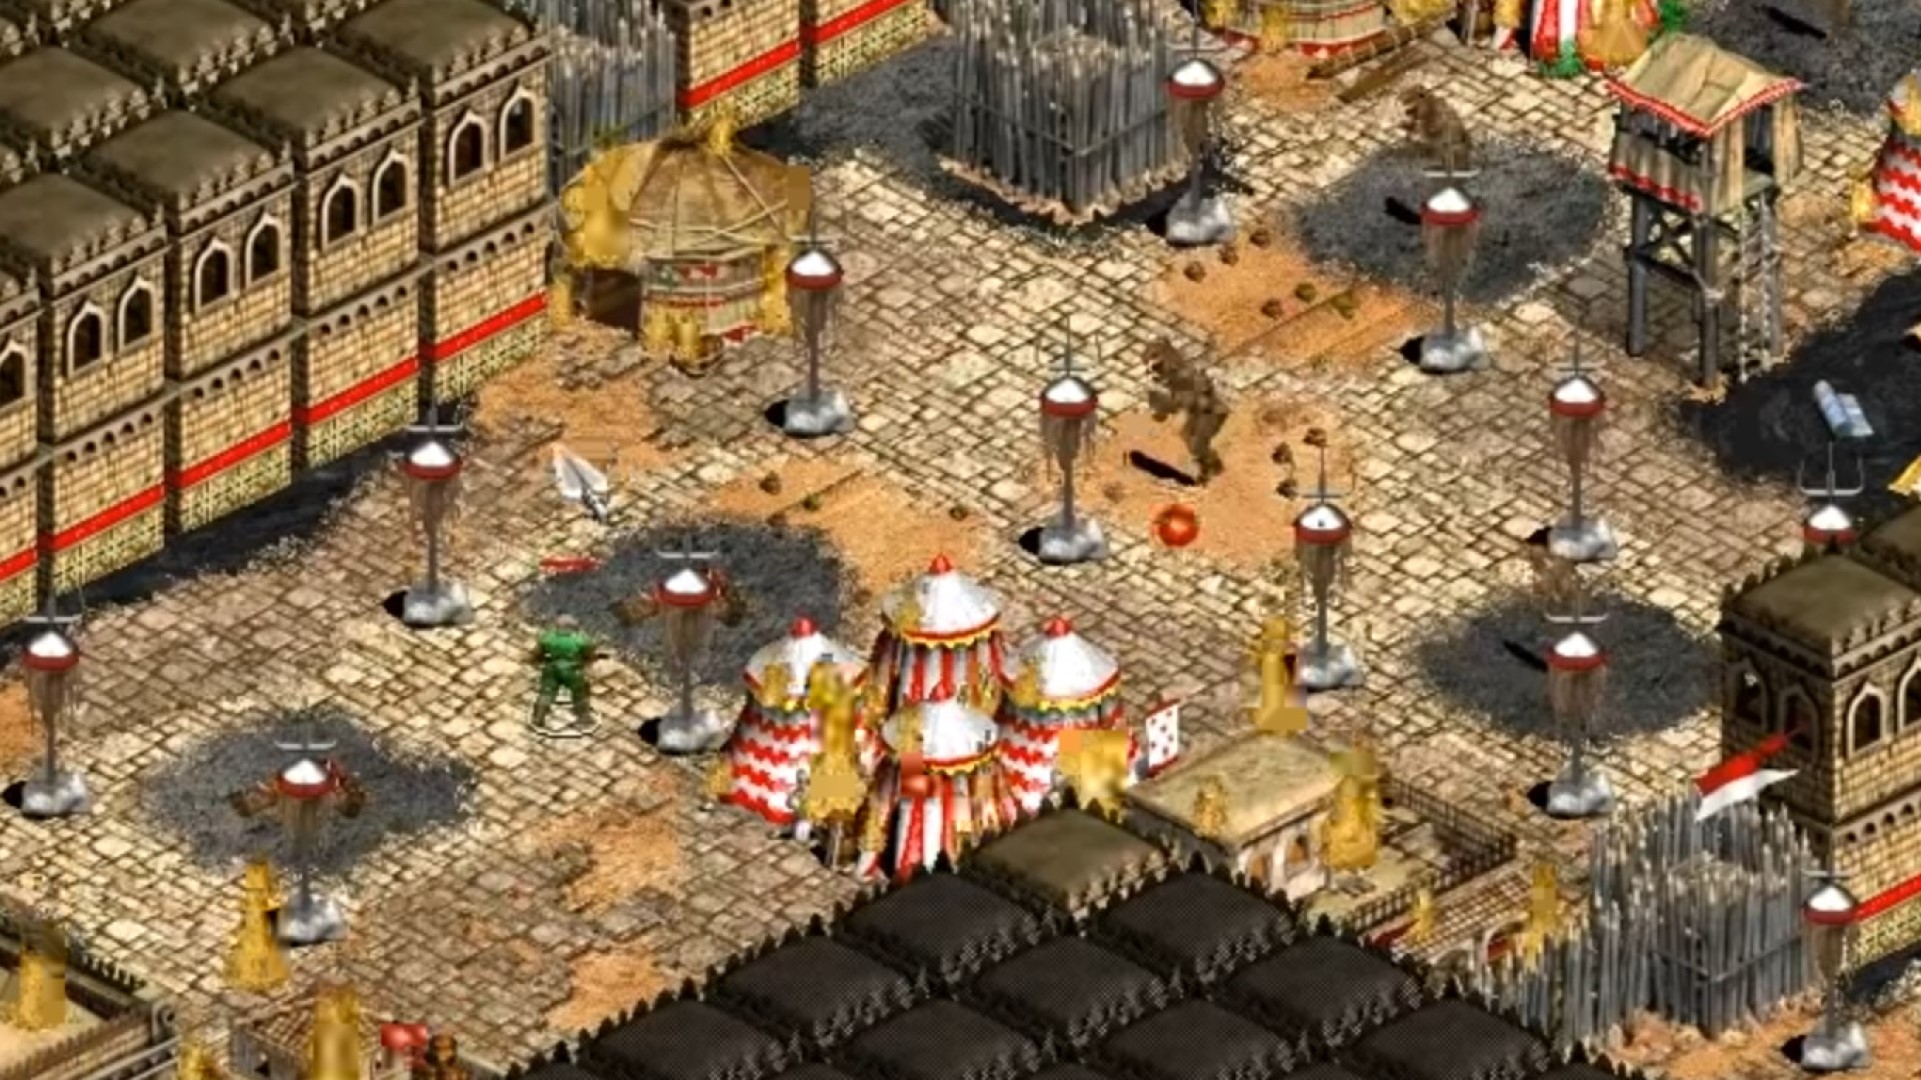 This mod adds a Doom campaign to Age of Empires 2